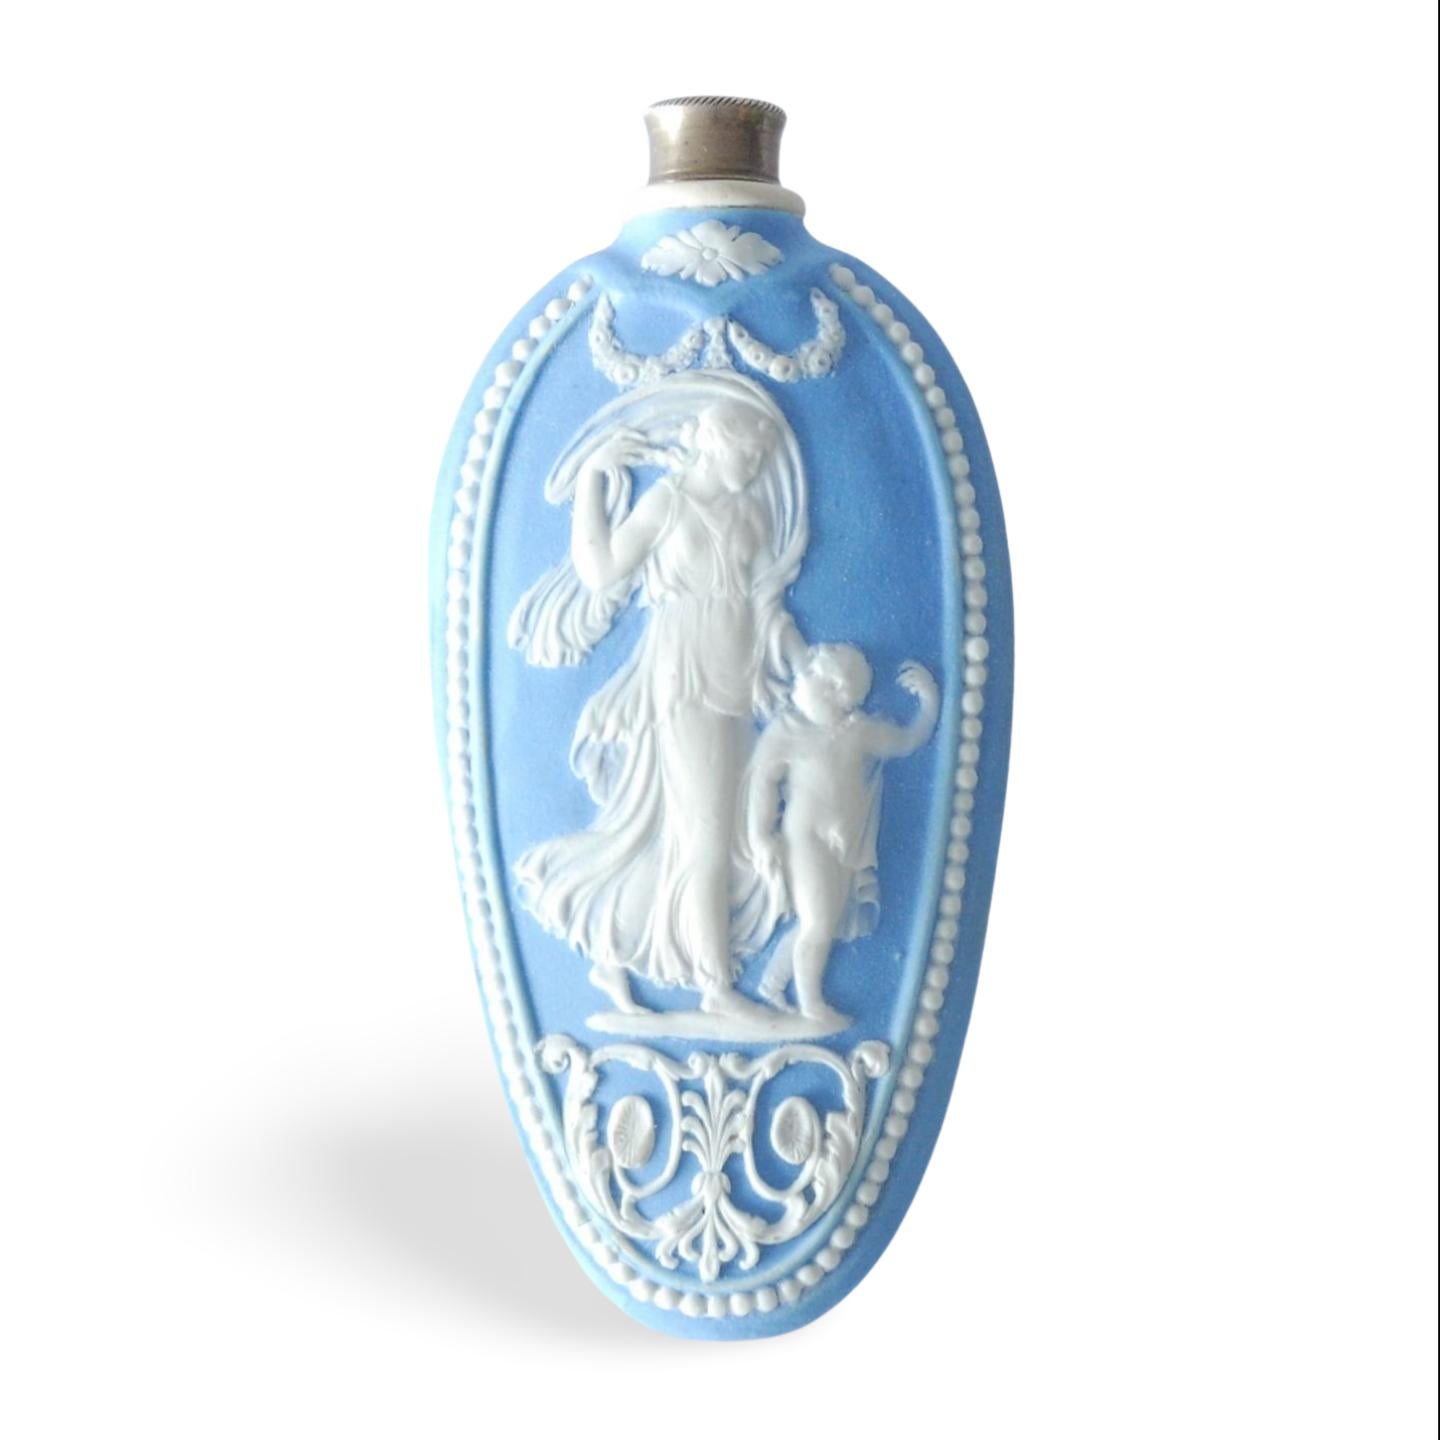 A scent bottle in pale blue jasperware, with original silver lid.

Decorated with Venus and Cupid, as allegories of Night -  the one shedding poppies, the other drawing the veil of stars over her head. 

The God of Love suggests this was intended as